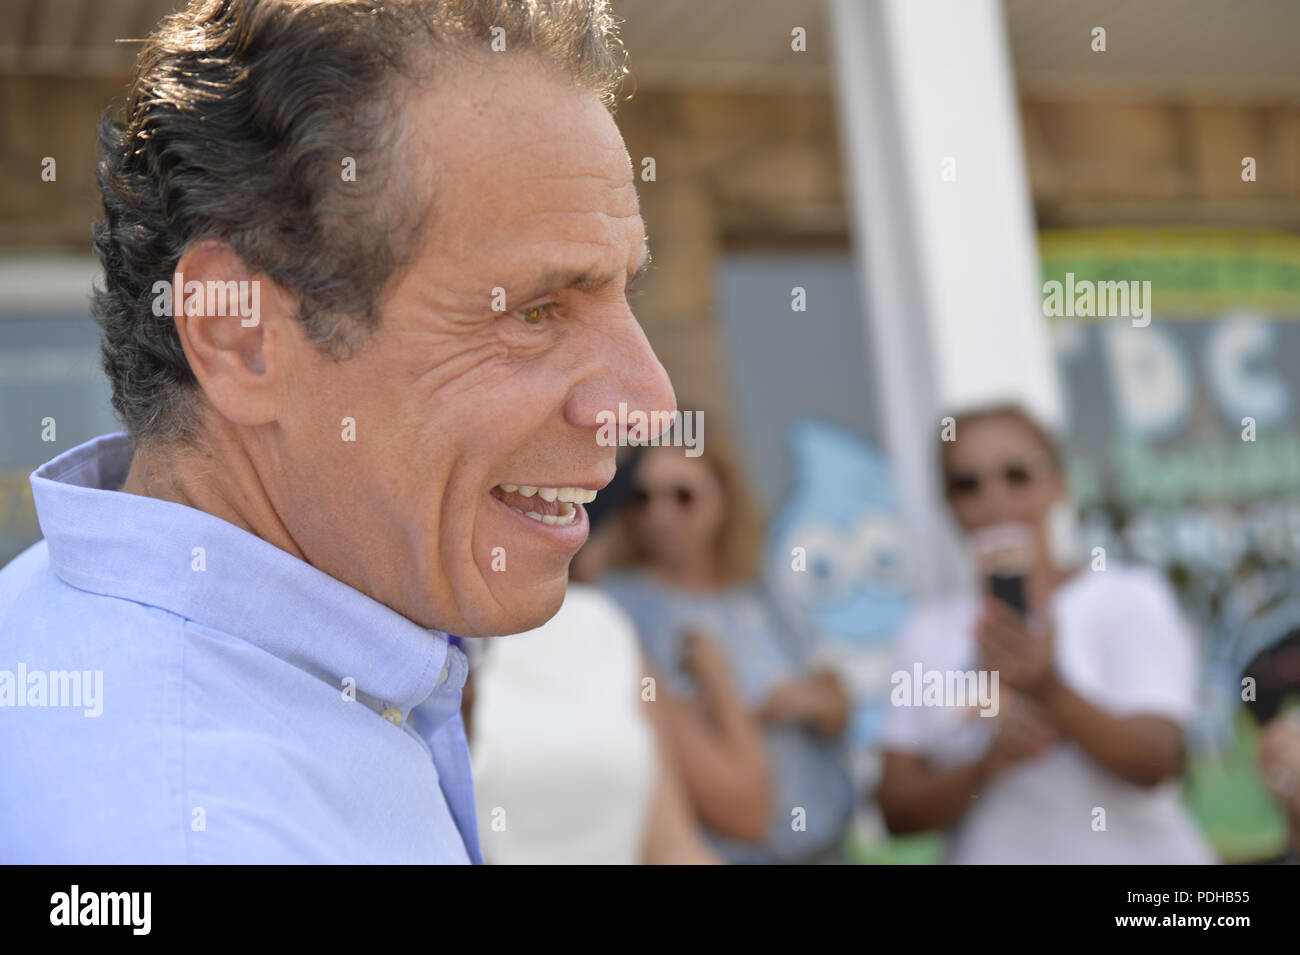 Massapequa, New York, USA. 5th Aug, 2018. Governor ANDREW CUOMO is a special guest at opening of joint campaign office for Grechen Shirley and NY Sen. J. Brooks, aiming for a Democratic Blue Wave in November midterm elections. Credit: Ann Parry/ZUMA Wire/Alamy Live News Stock Photo